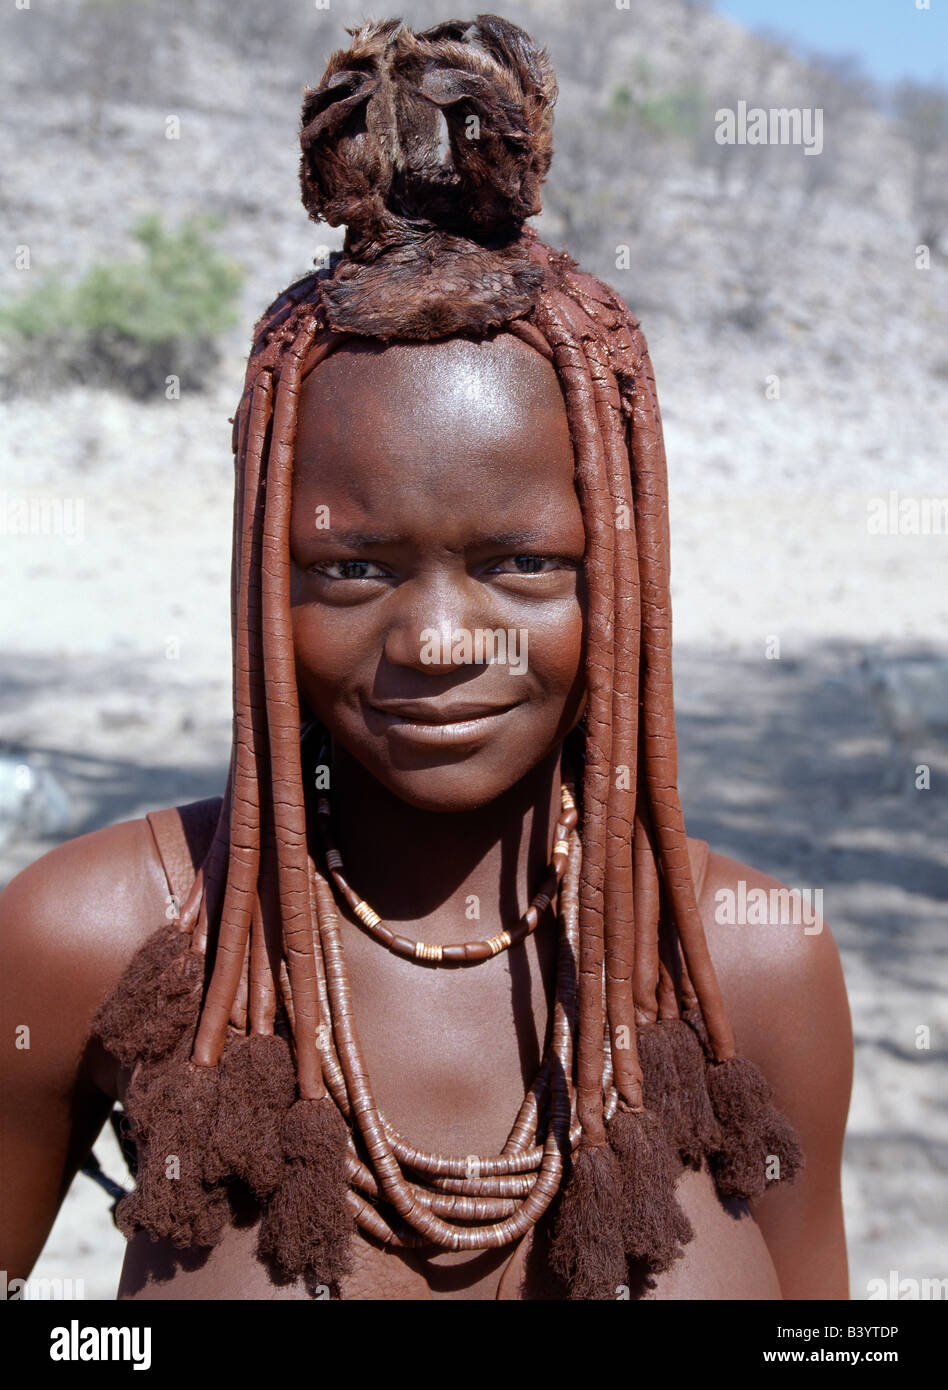 Namibia, Kaokoland, Epupa. A young Himba girl in traditional attire. Her body gleams from a mixture of red ochre, butterfat and herbs. Her hair is styled in the traditional Himba way and is crowned with a headdress made of lambskin, called erembe. Her necklace includes ostrich-shell beads. The Himba are Herero-speaking Bantu nomads who live in the harsh, dry but starkly beautiful landscape of remote northwest Namibia. Stock Photo